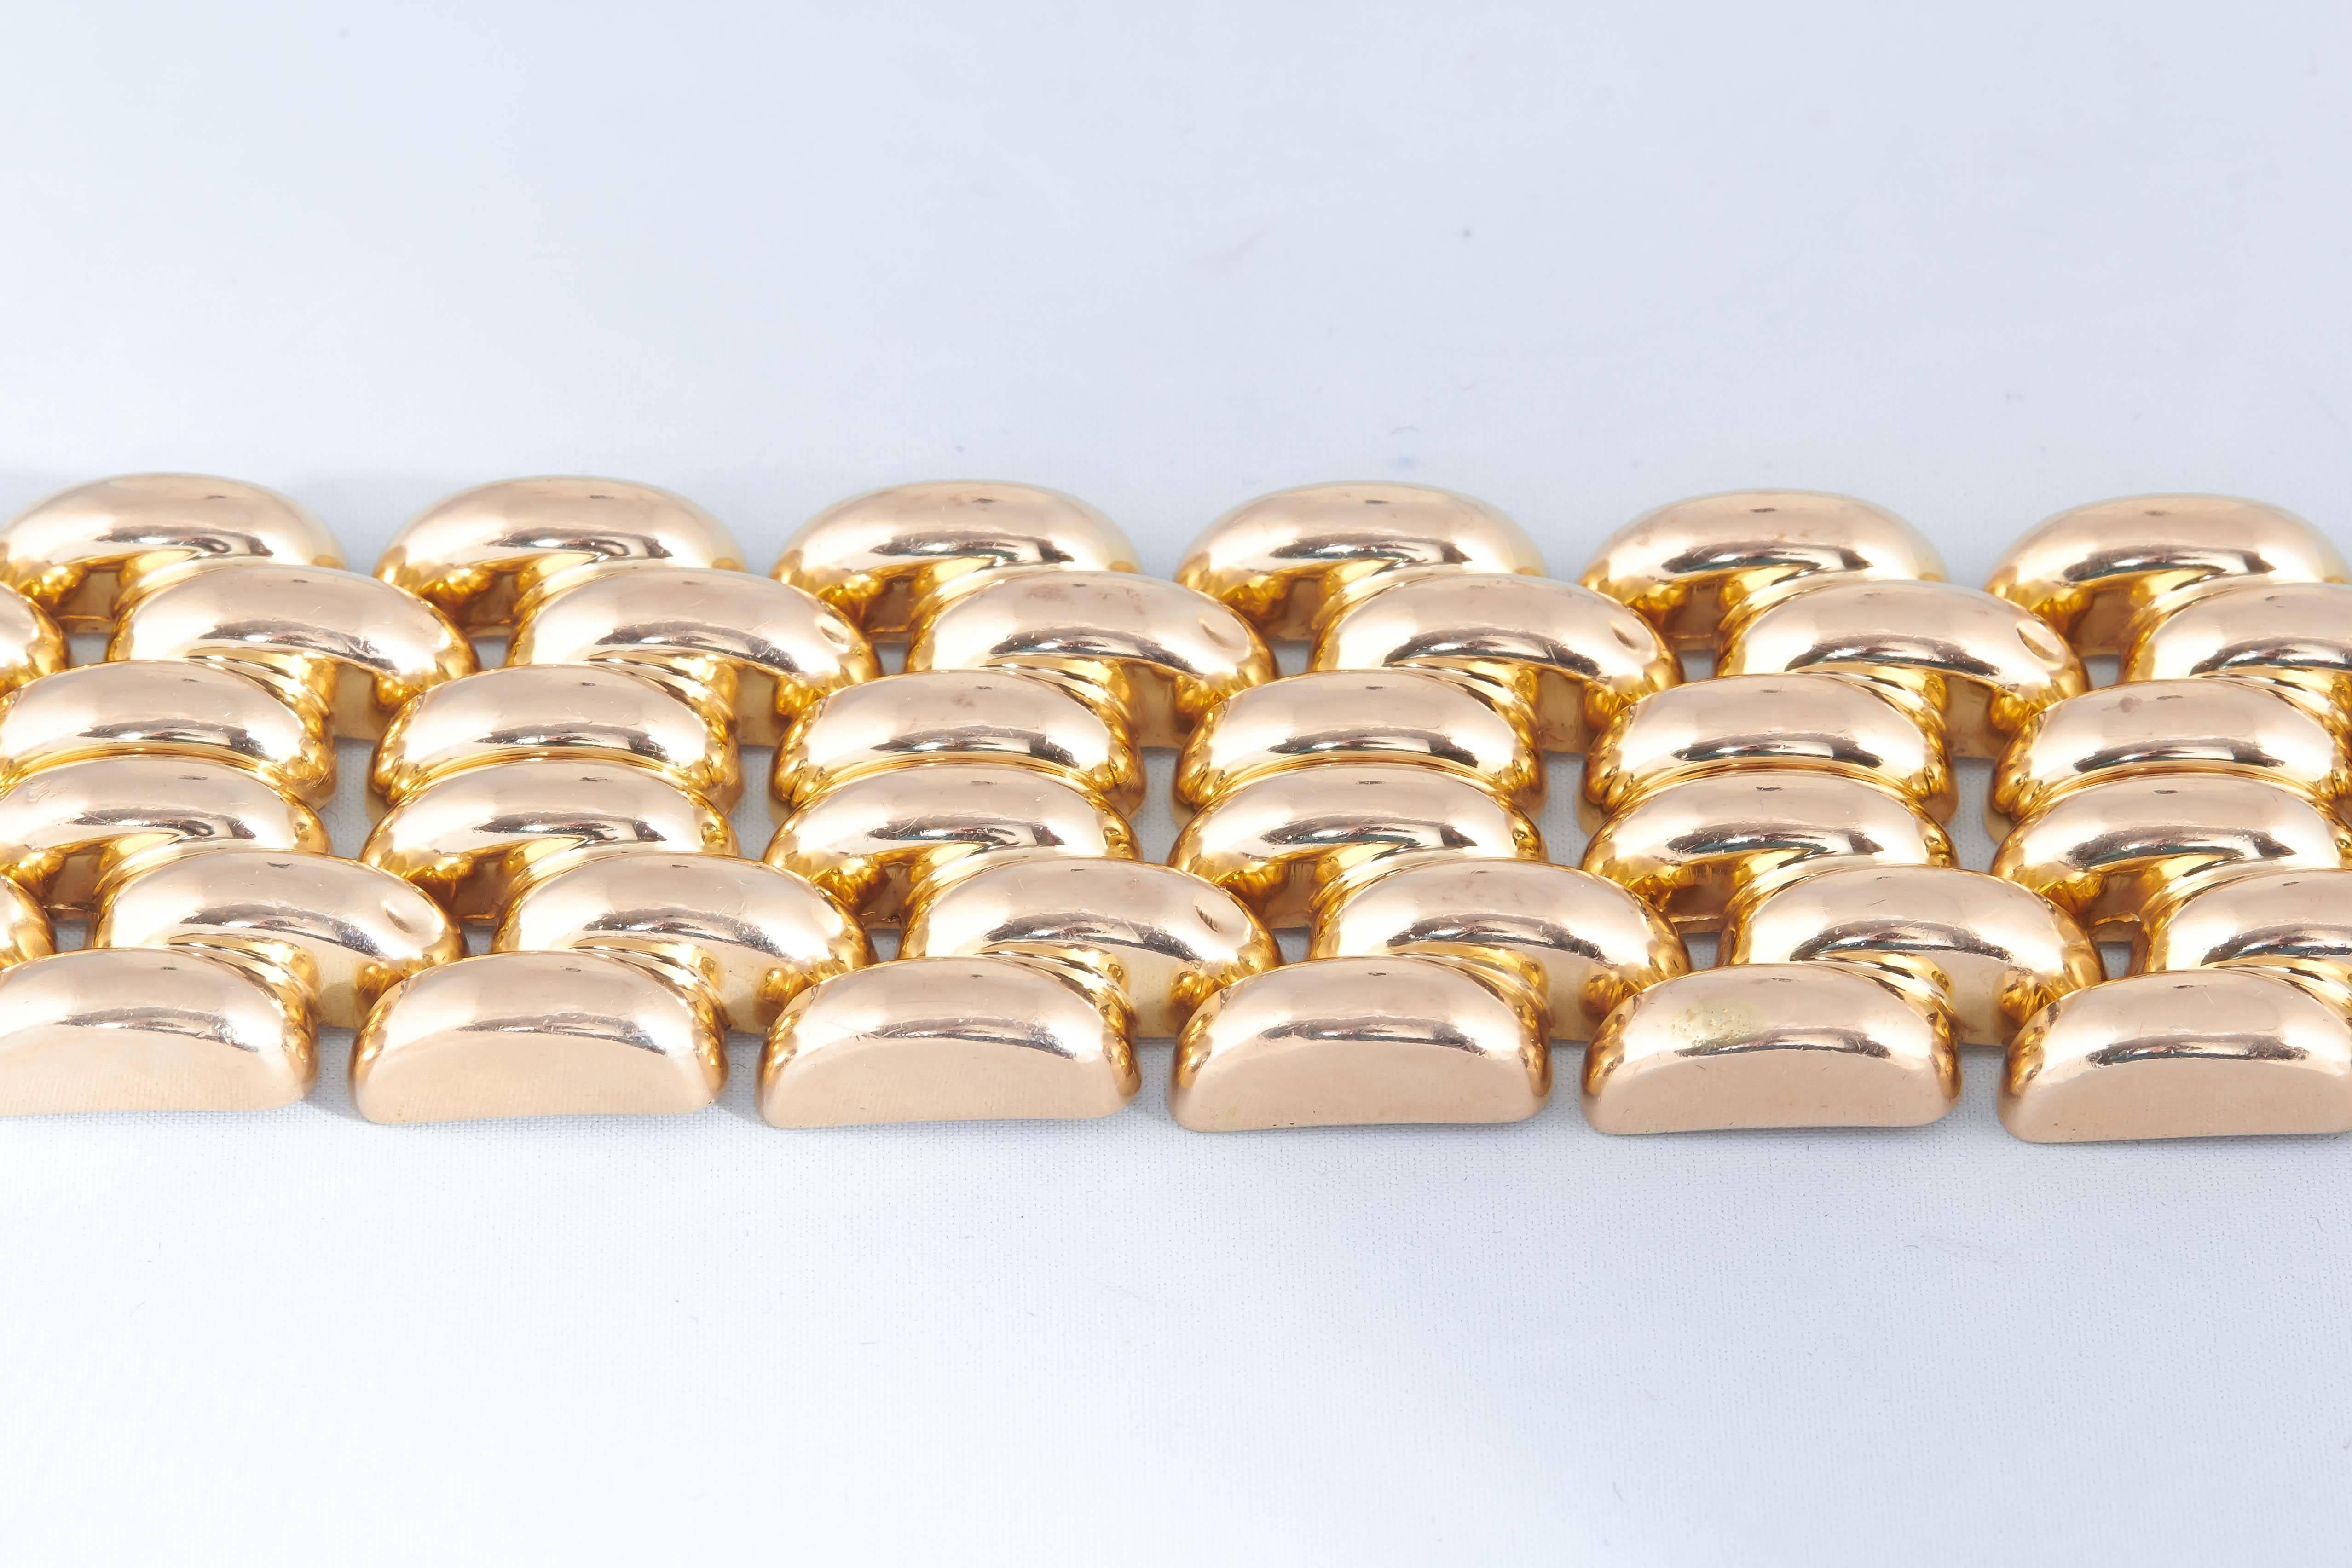 18kt Gold Six Row Link Bracelet Consisting Of A High Style Tank Design Interlocking Curbed Links With A High Polish Gold Dramatic Look. Designed In The 1950's In America.